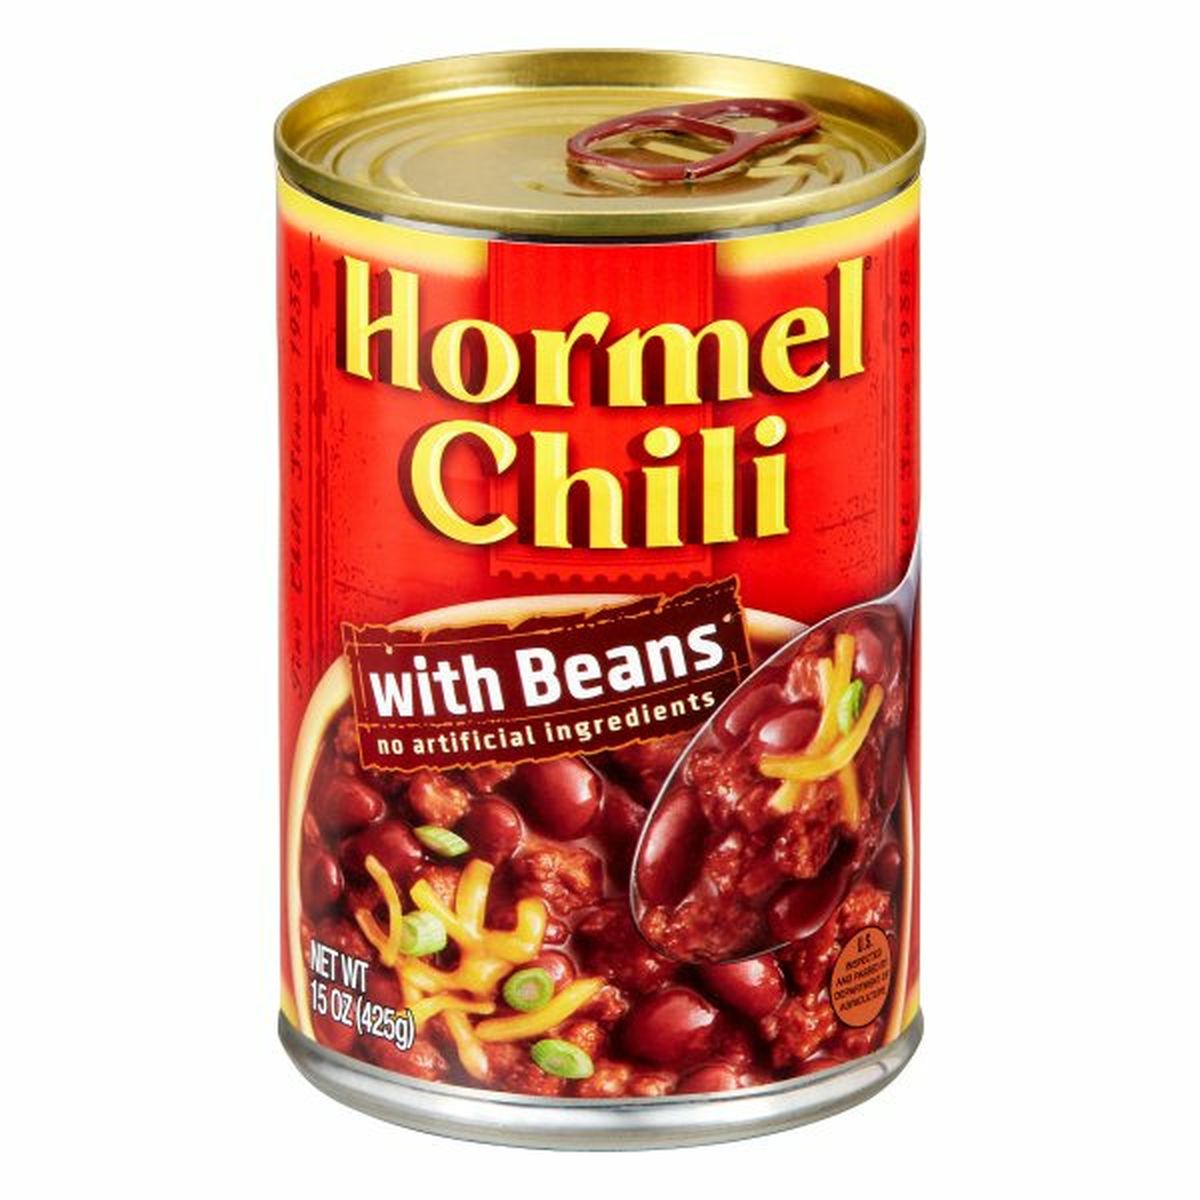 Calories in Hormel Chili, with Beans